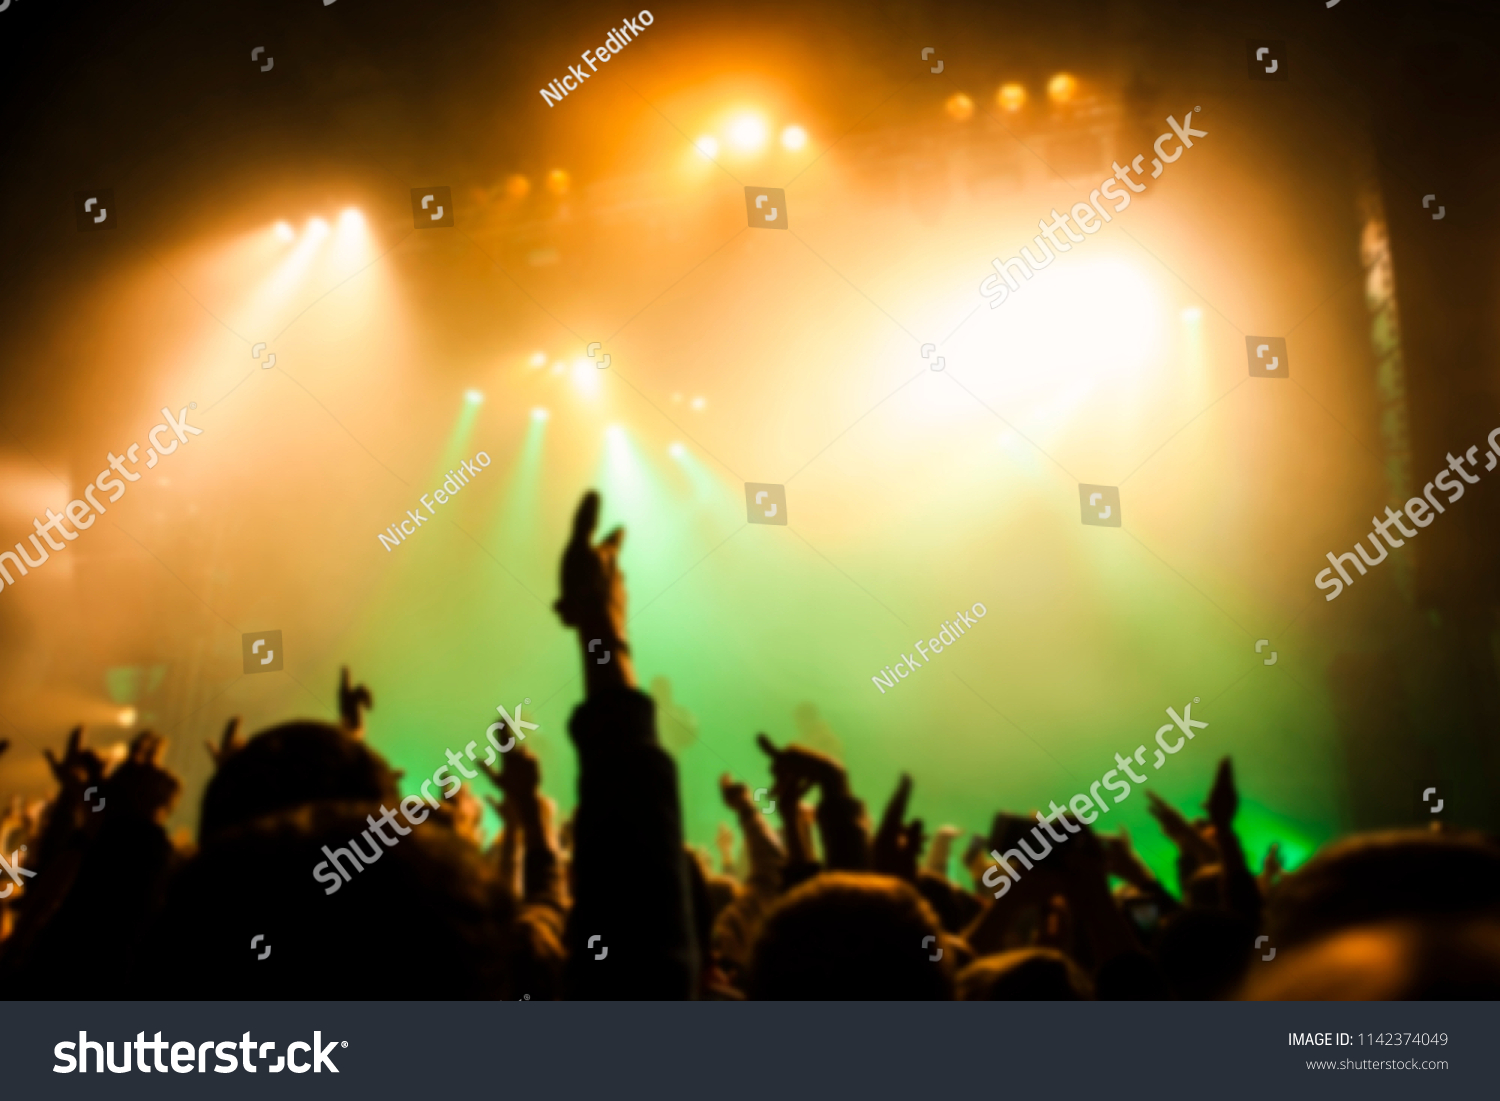 Musical concert. People in the concert hall at the disco . Singer in front of the audience. Fans at the concert. Blurred image / blurred photo.  #1142374049